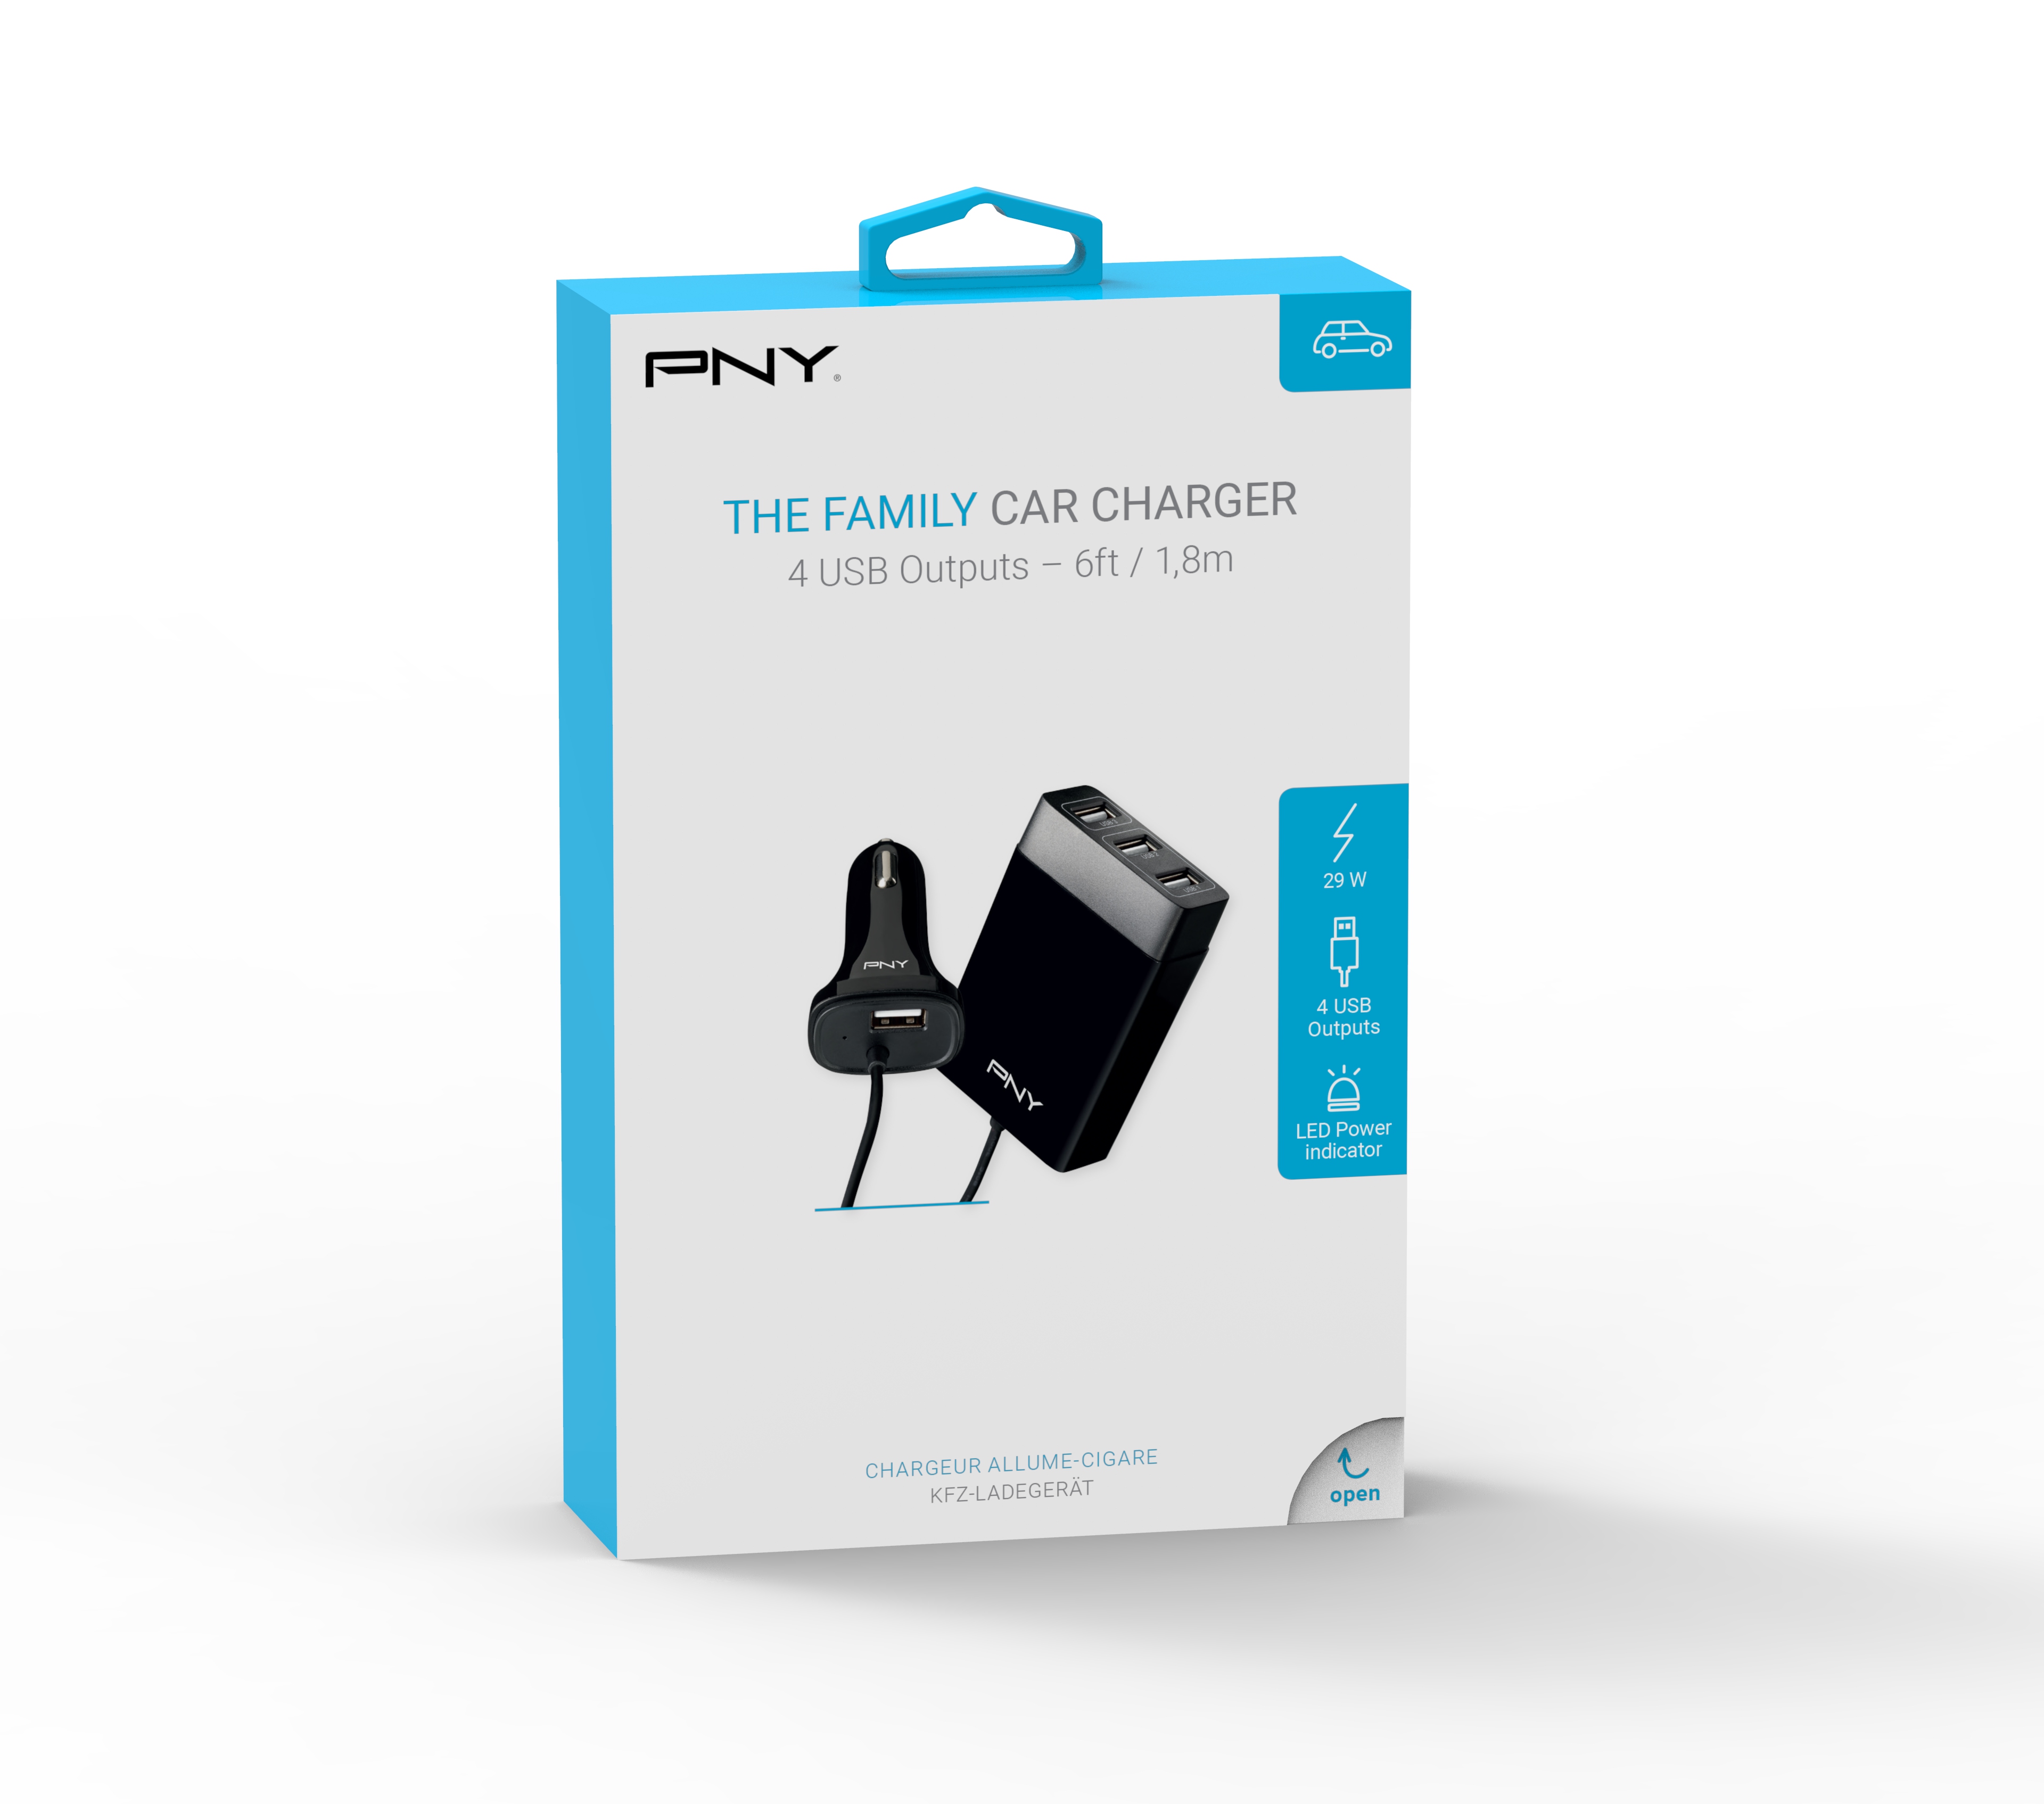 PNY_Family_Car_Charger_NewPackaging.jpg